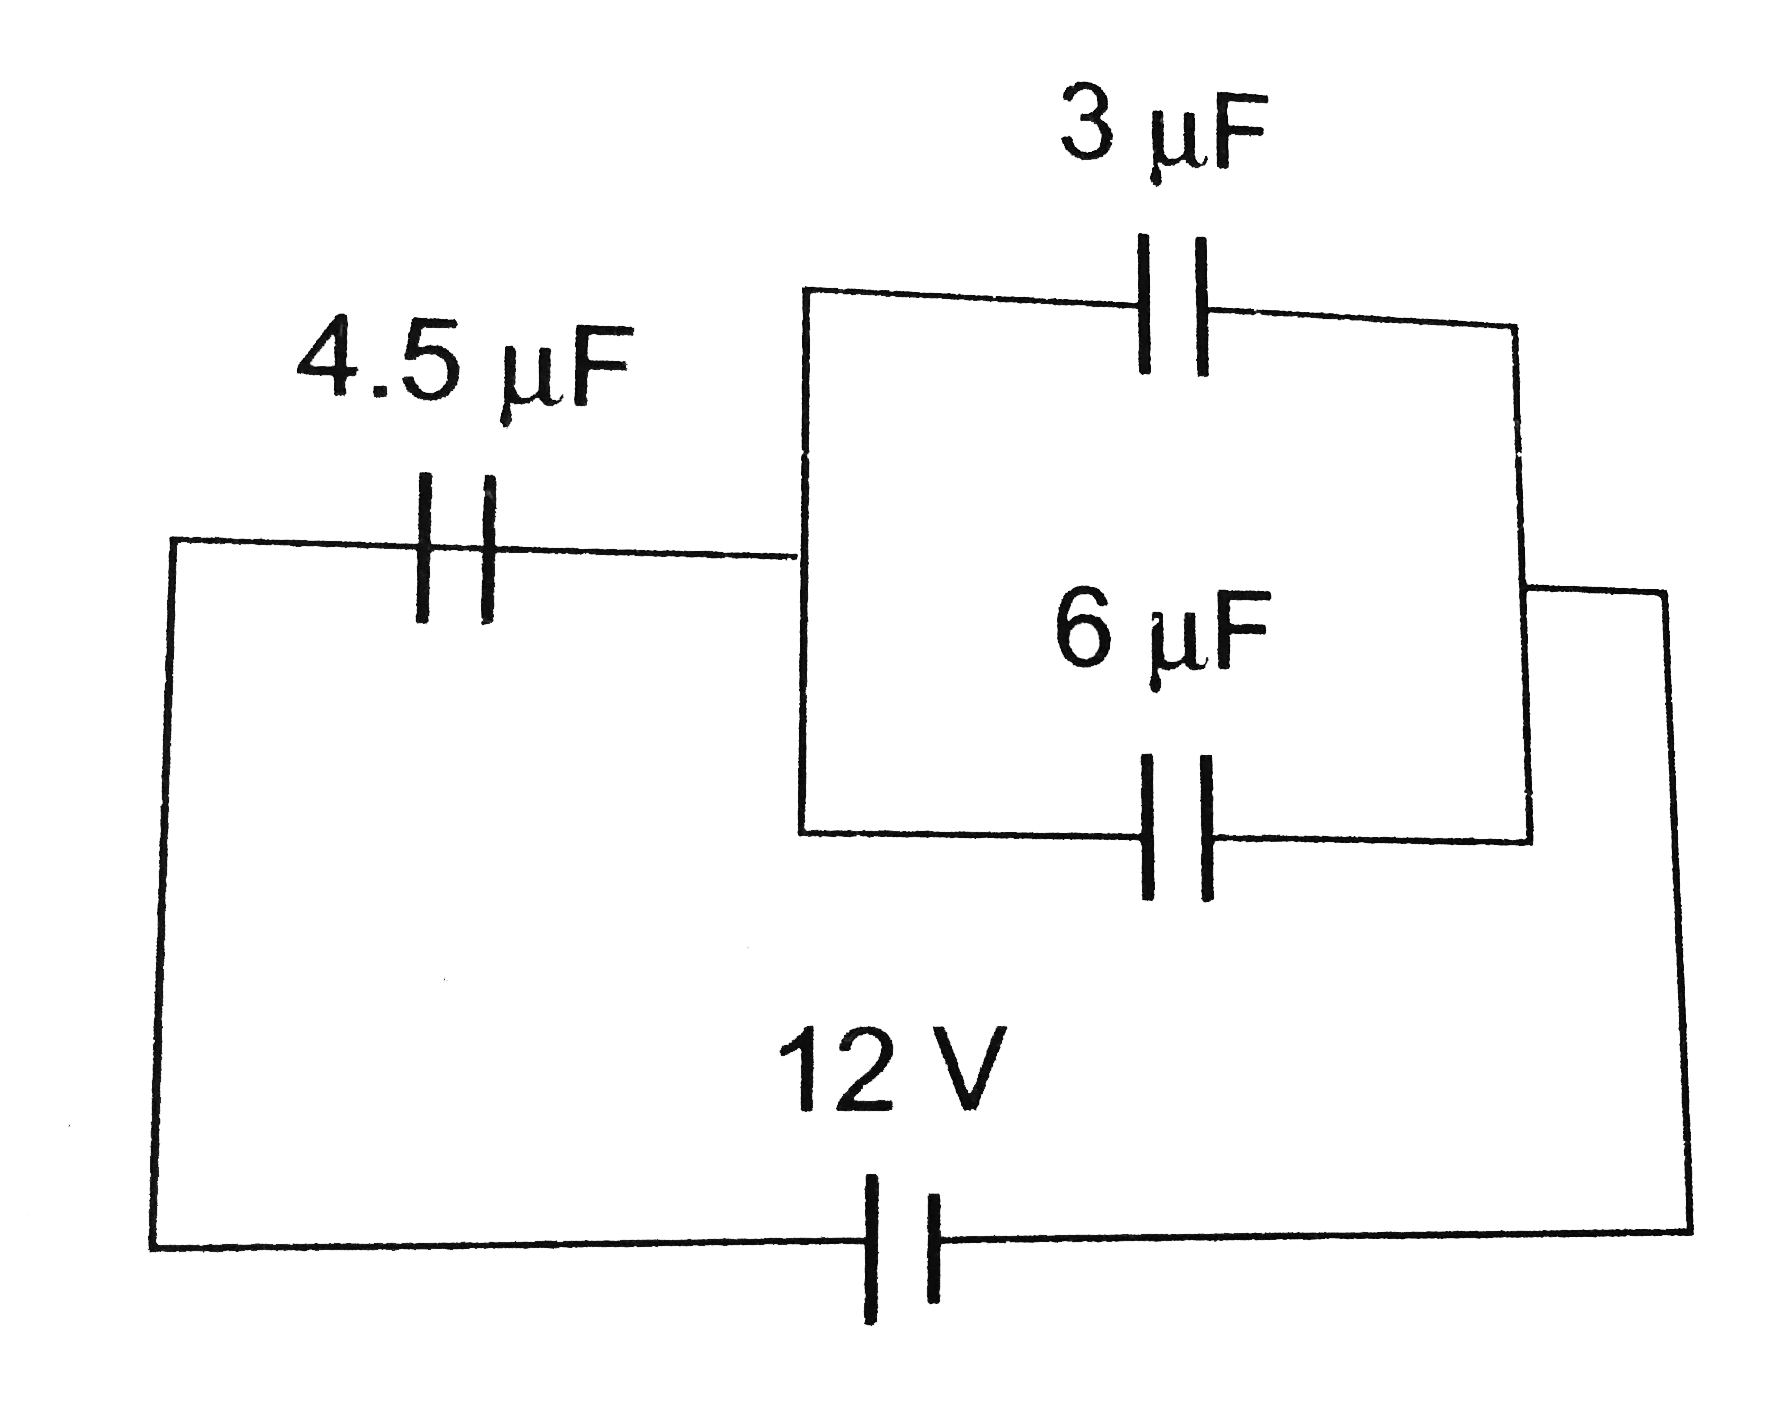 In the circuit shown in the figure, the potential difference across the 4.5 muF capacitor is